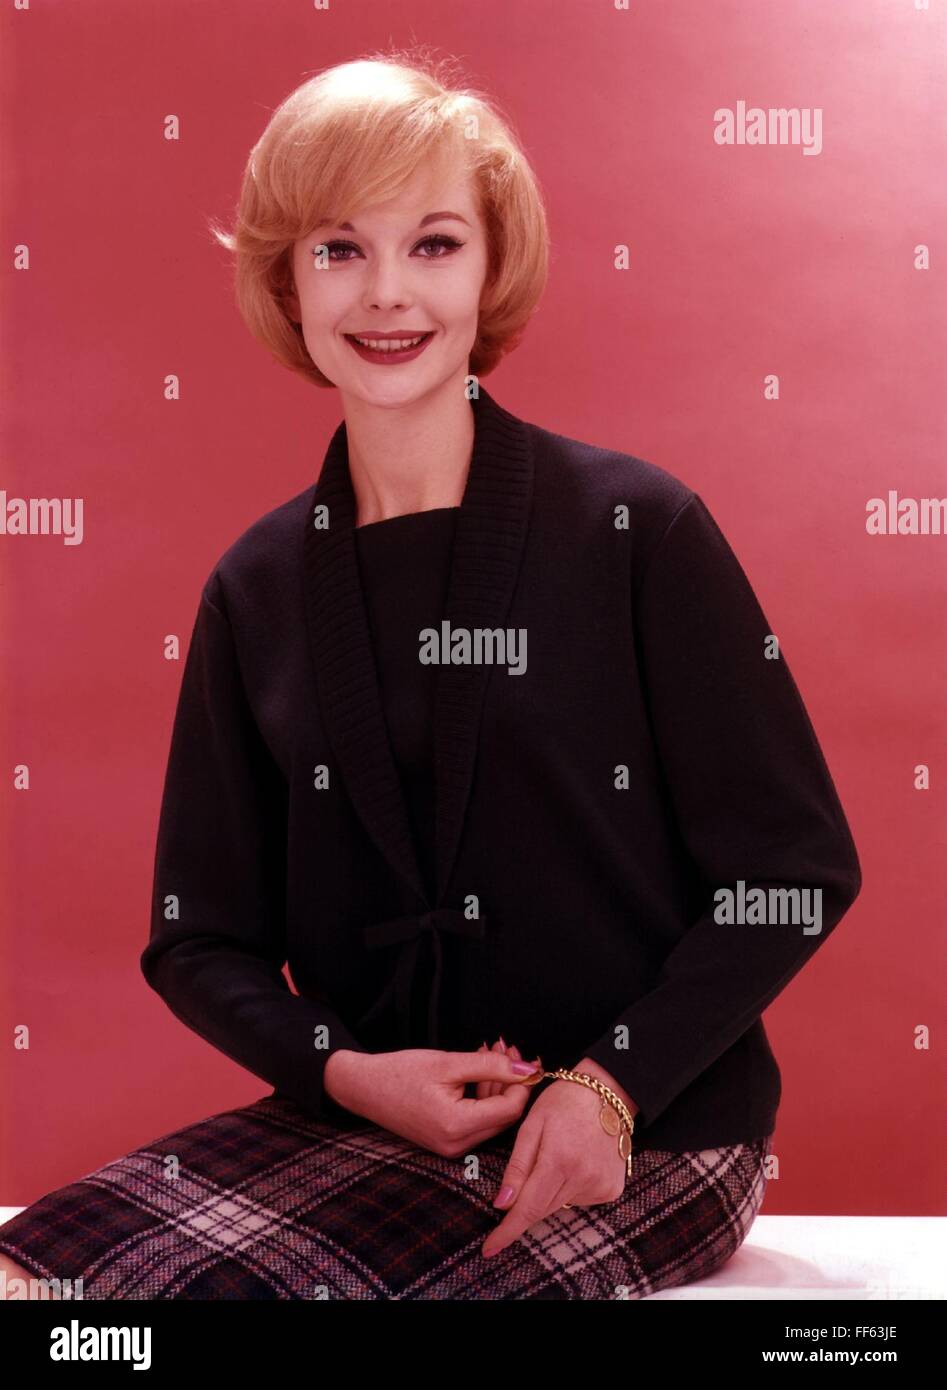 fashion, 1960s, ladies' fashion, woman wearing black twin set, Additional-Rights-Clearences-Not Available Stock Photo